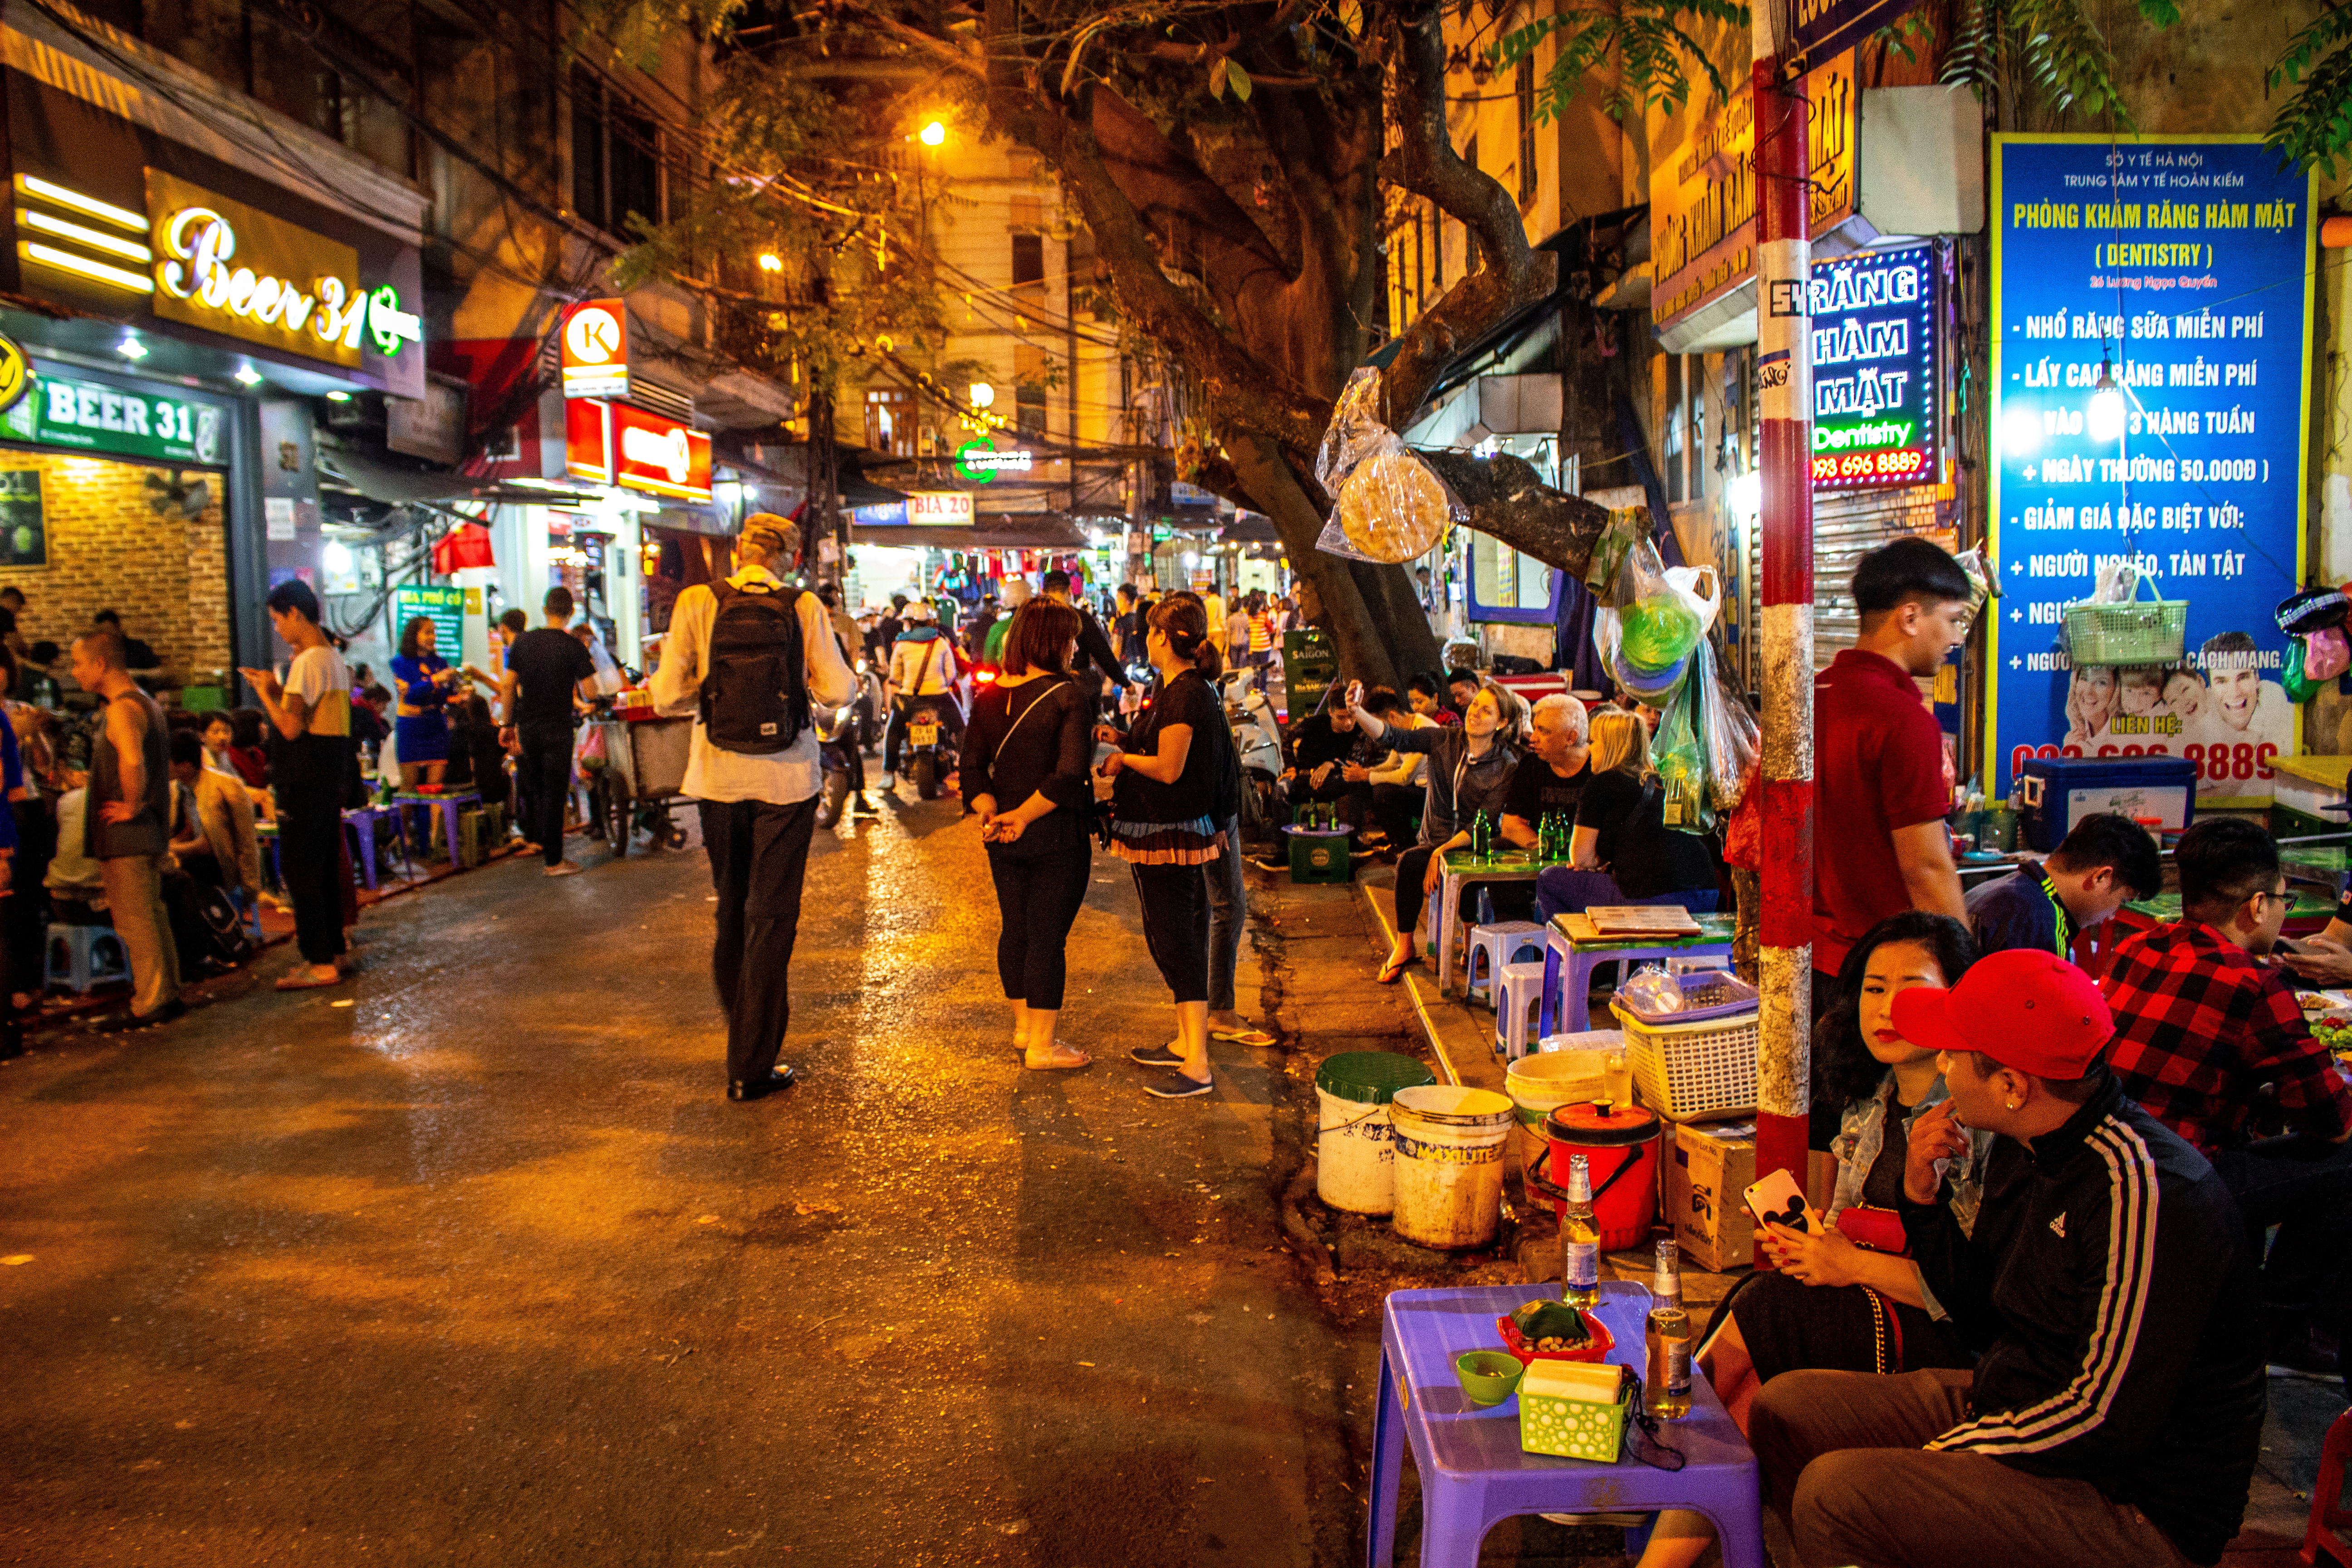 People enjoying the evening in the street with full of bars in Hanoi